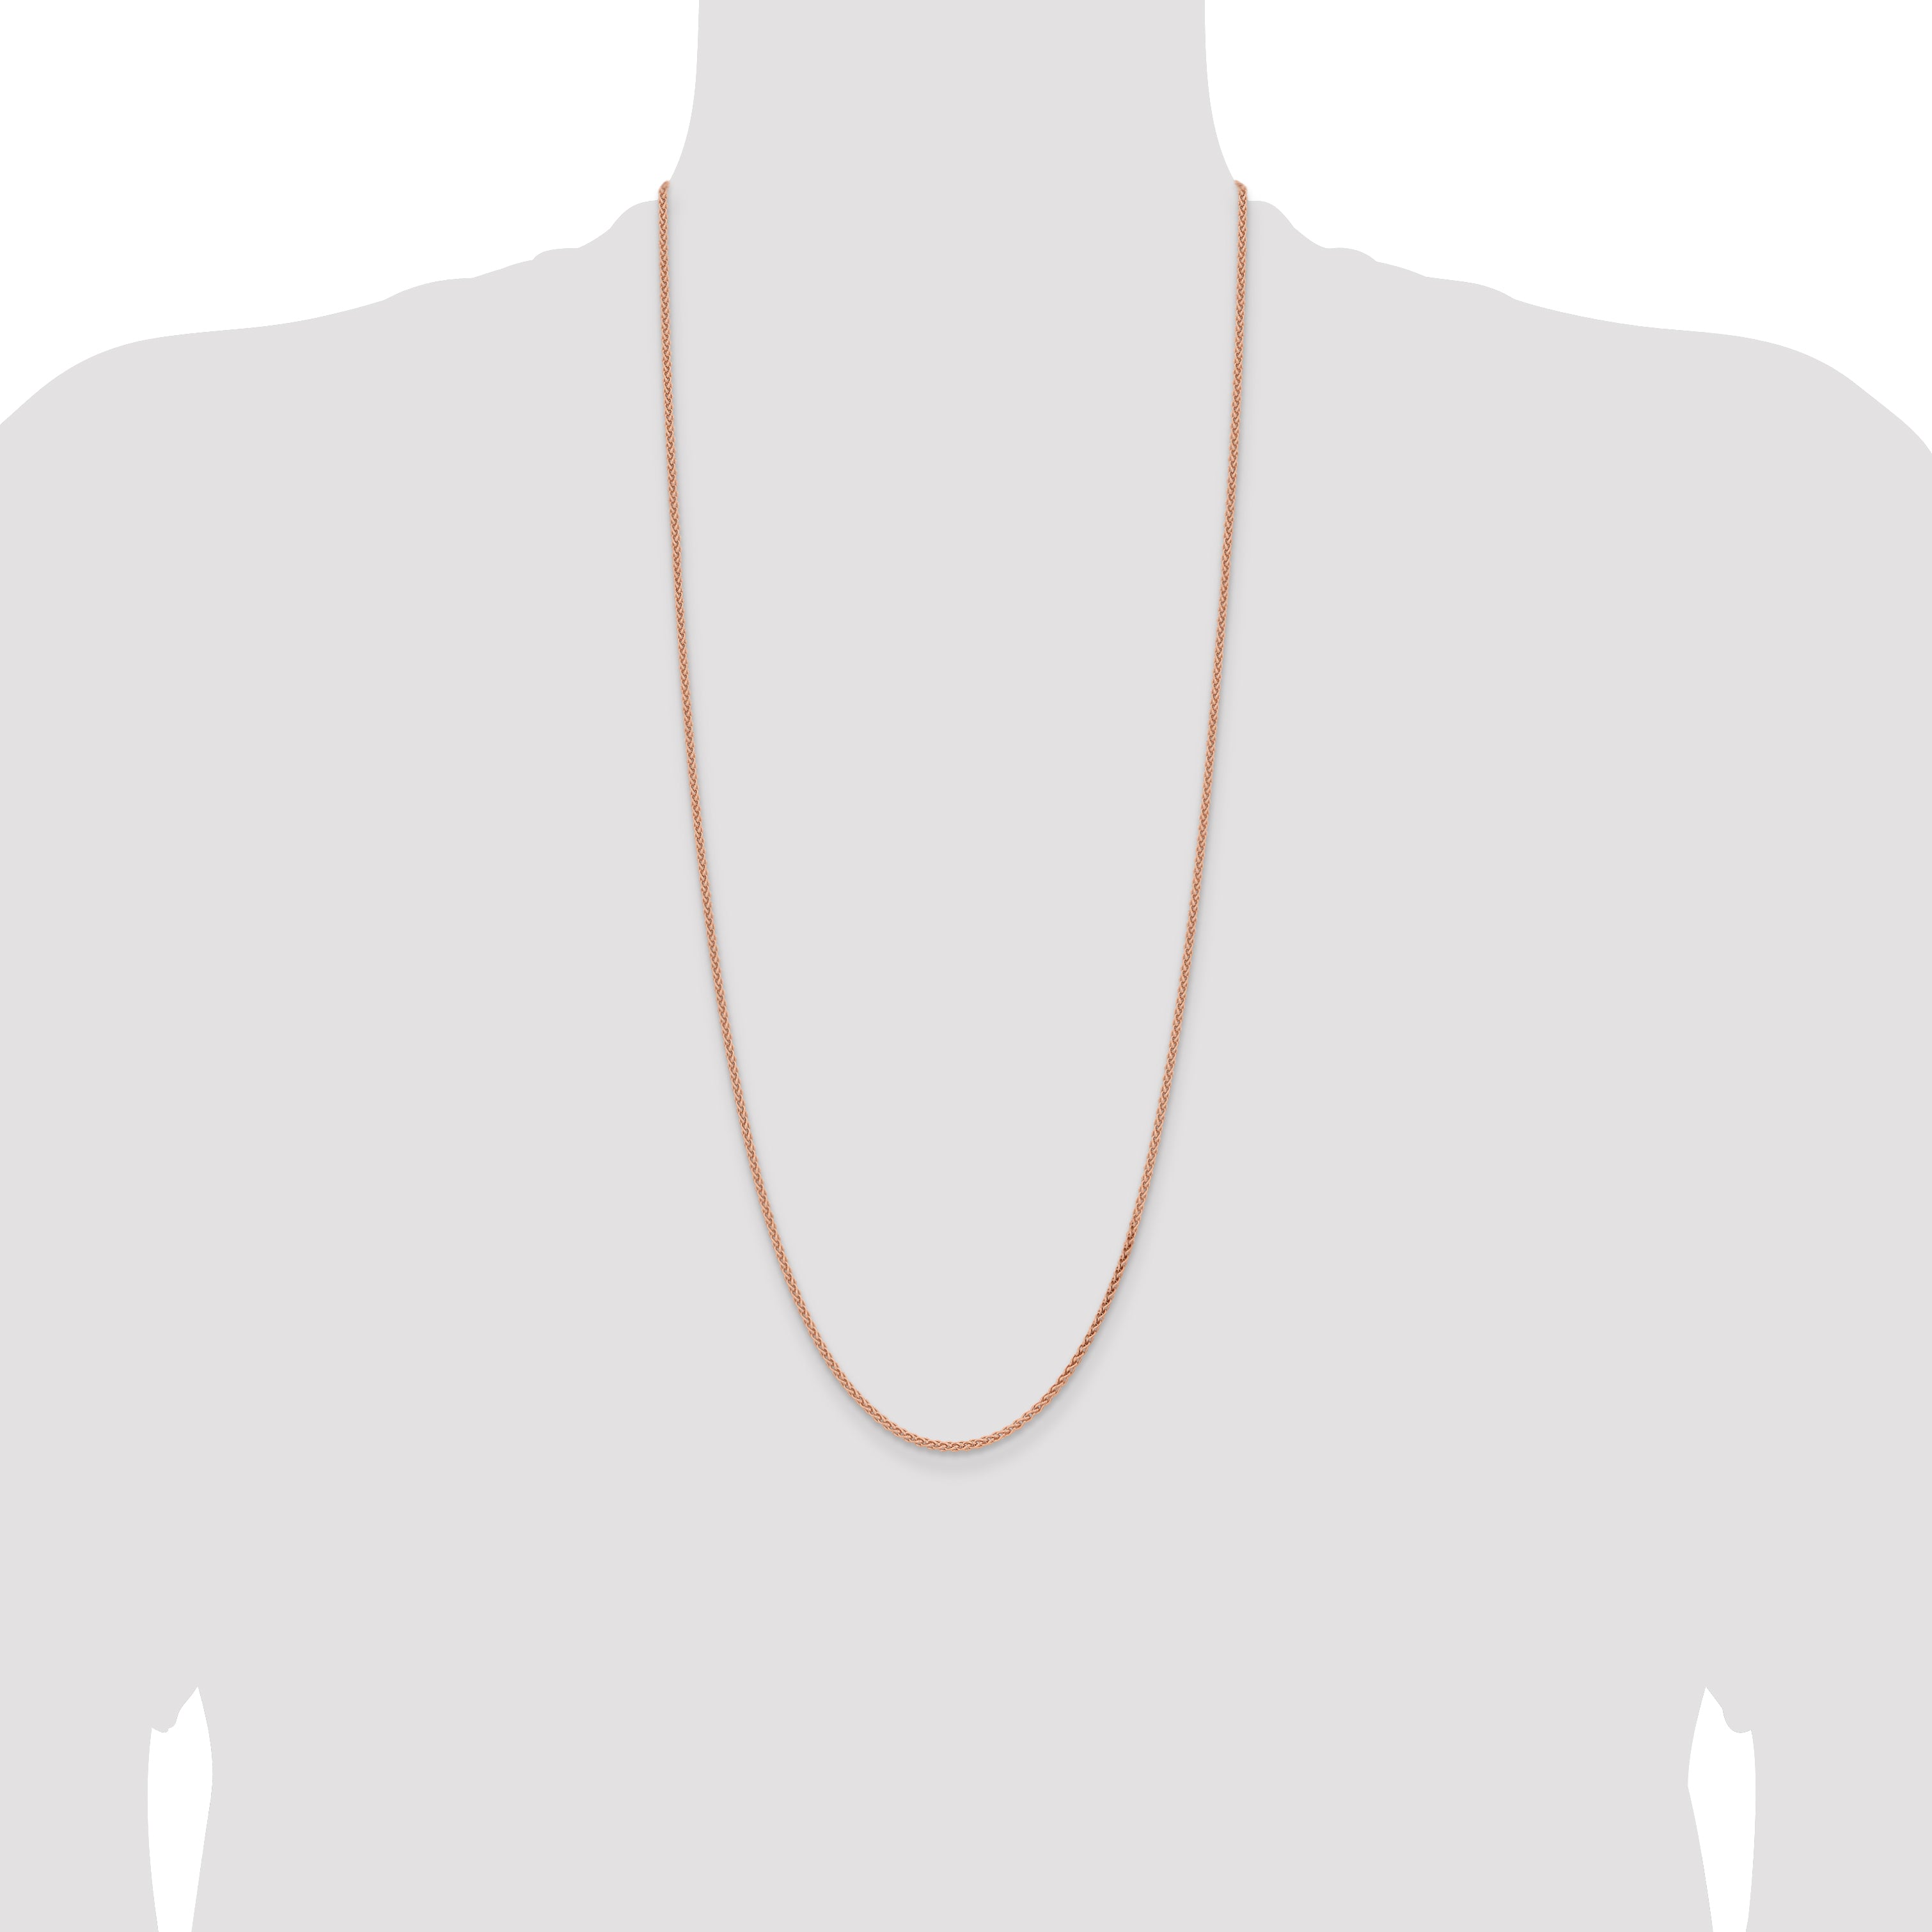 14K Rose Gold 16 inch 2.1mm Solid Polished Spiga with Lobster Clasp Chain